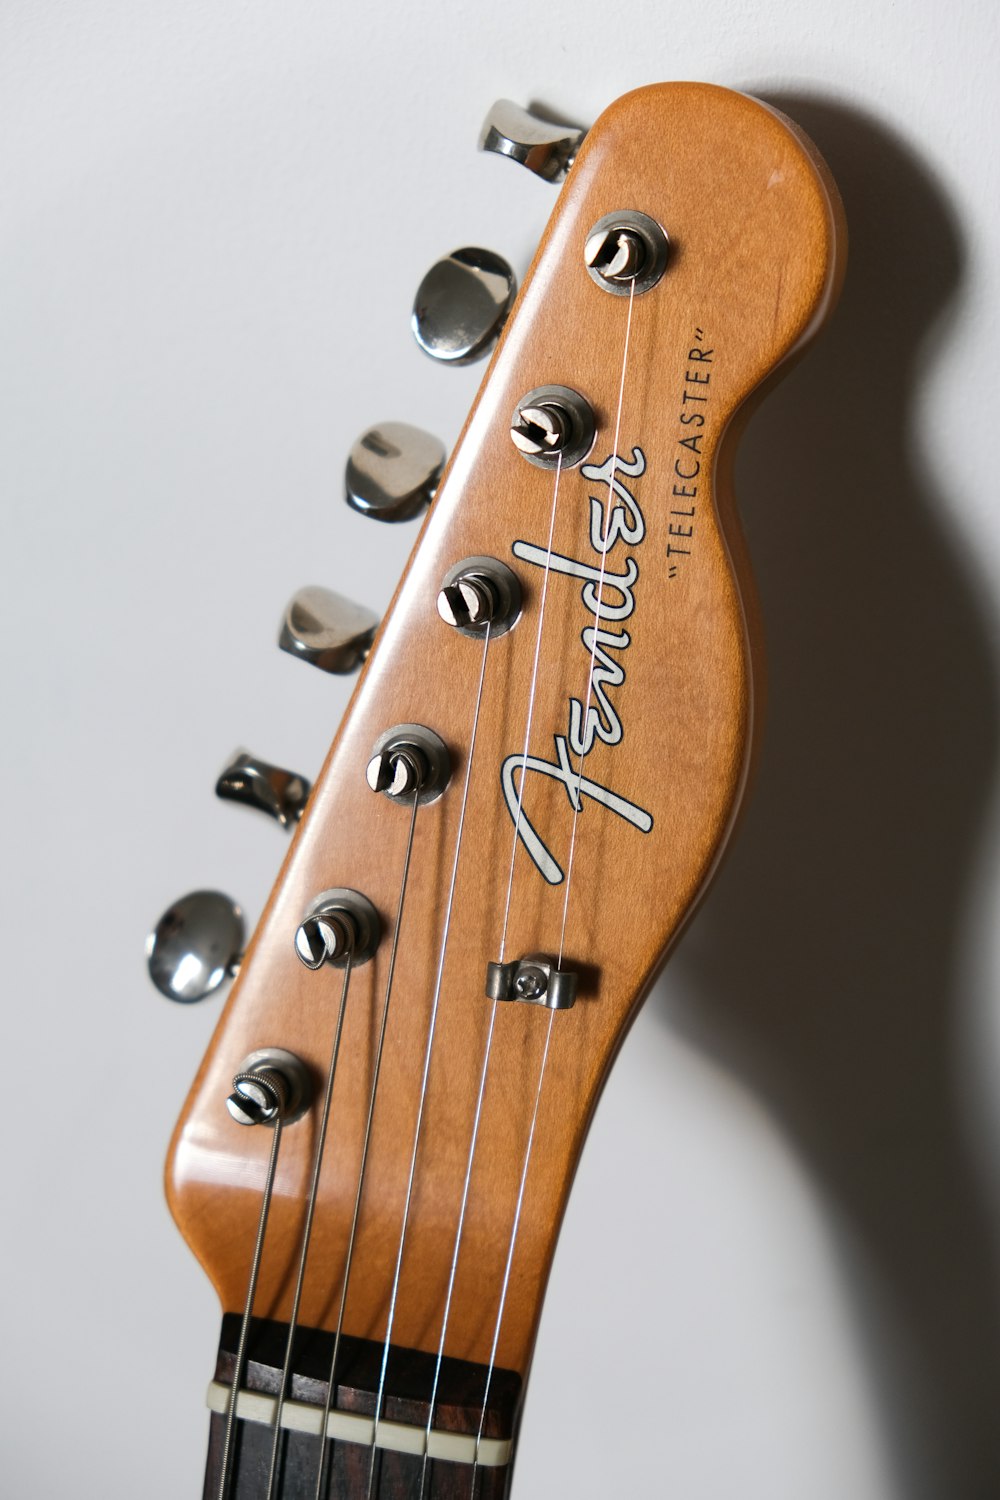 Fender Stock Photos - 36,378 Images